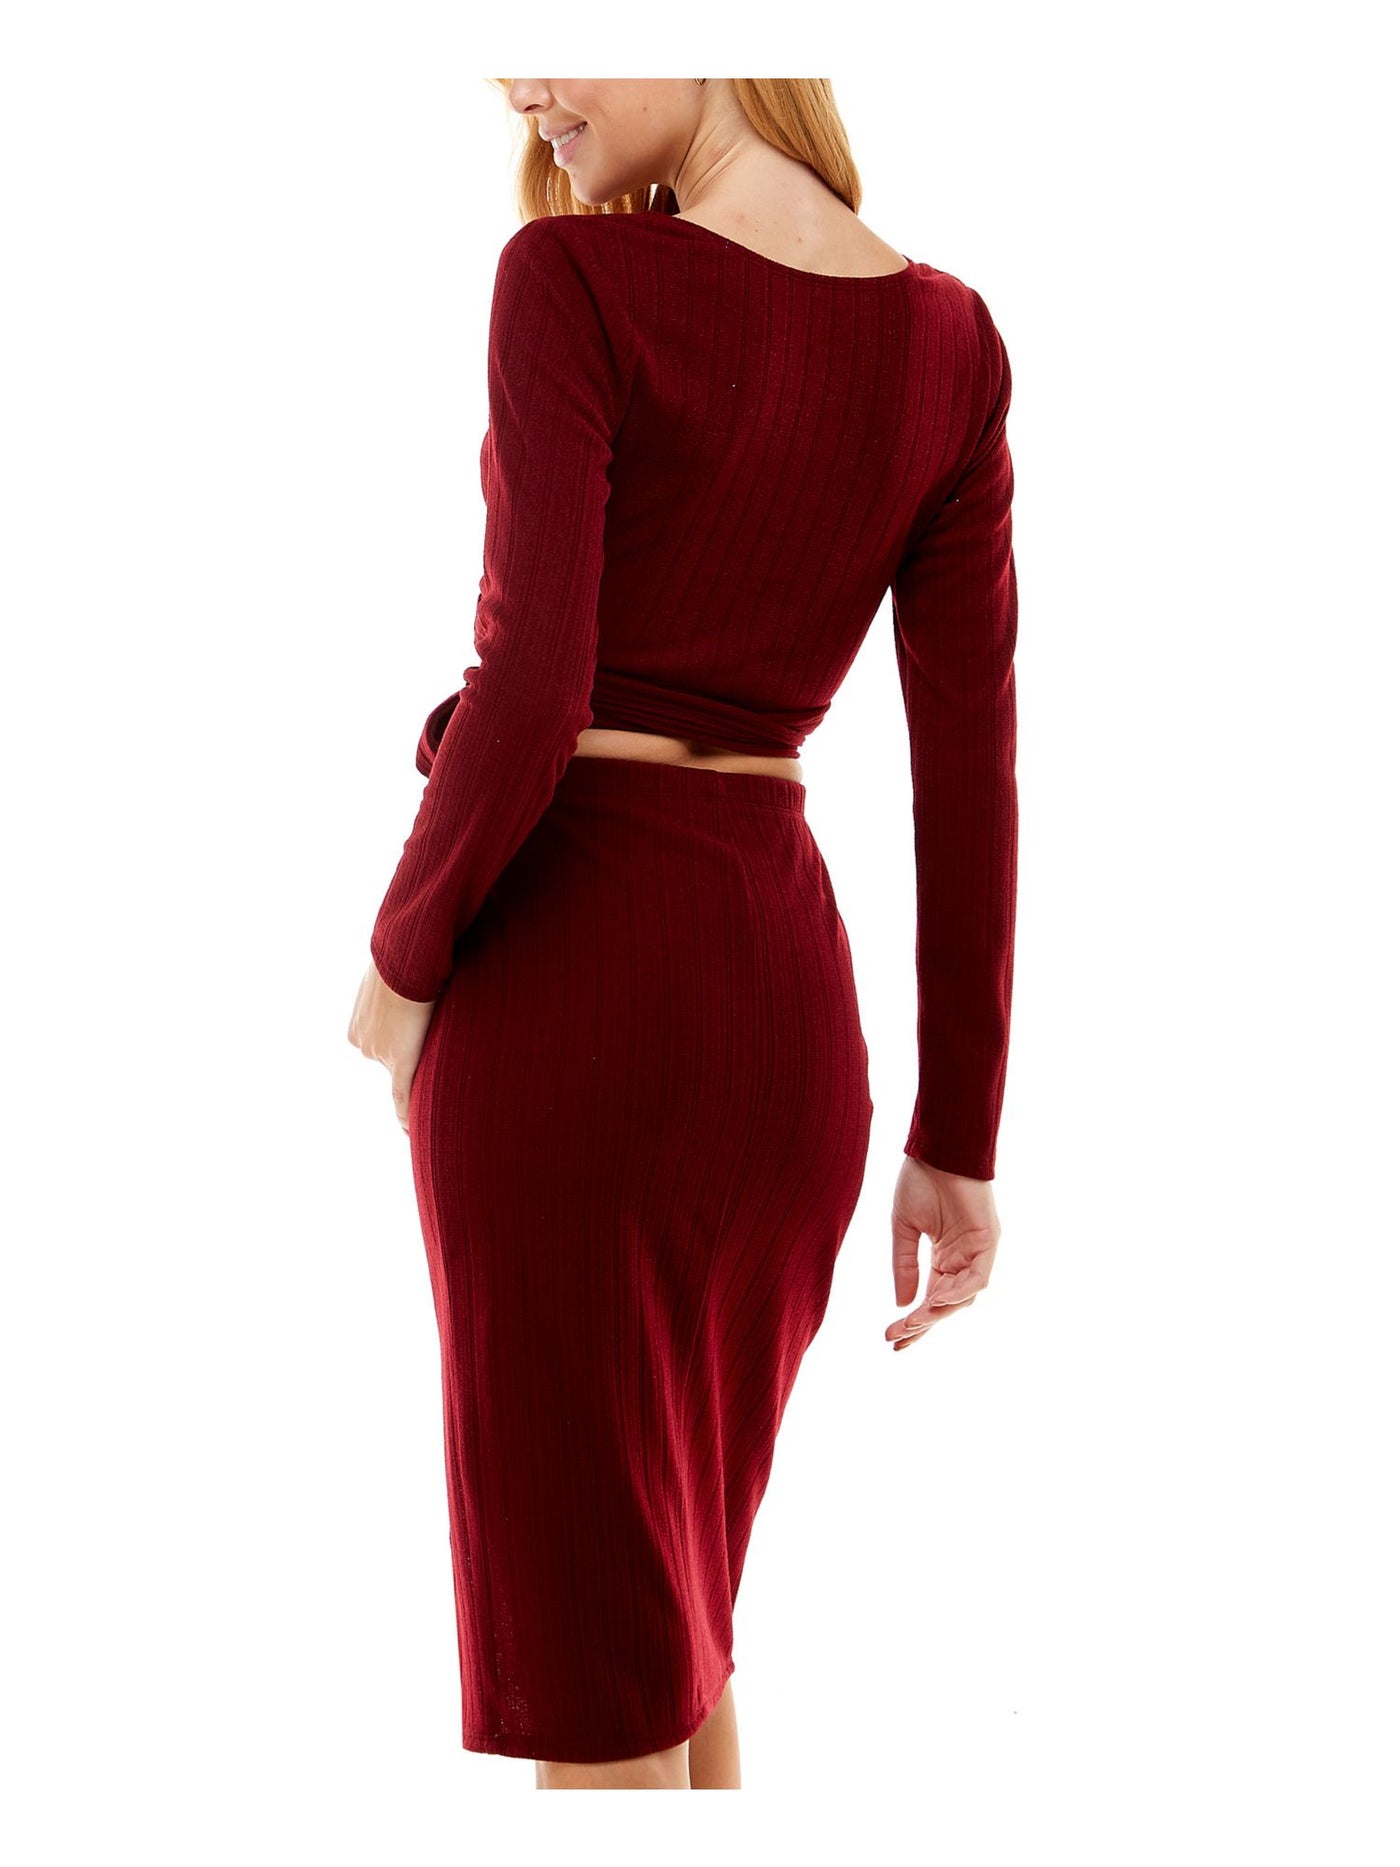 CITY STUDIO Womens Maroon Ribbed Tie Slitted Long Sleeve V Neck Knee Length Party Body Con Dress Juniors XS